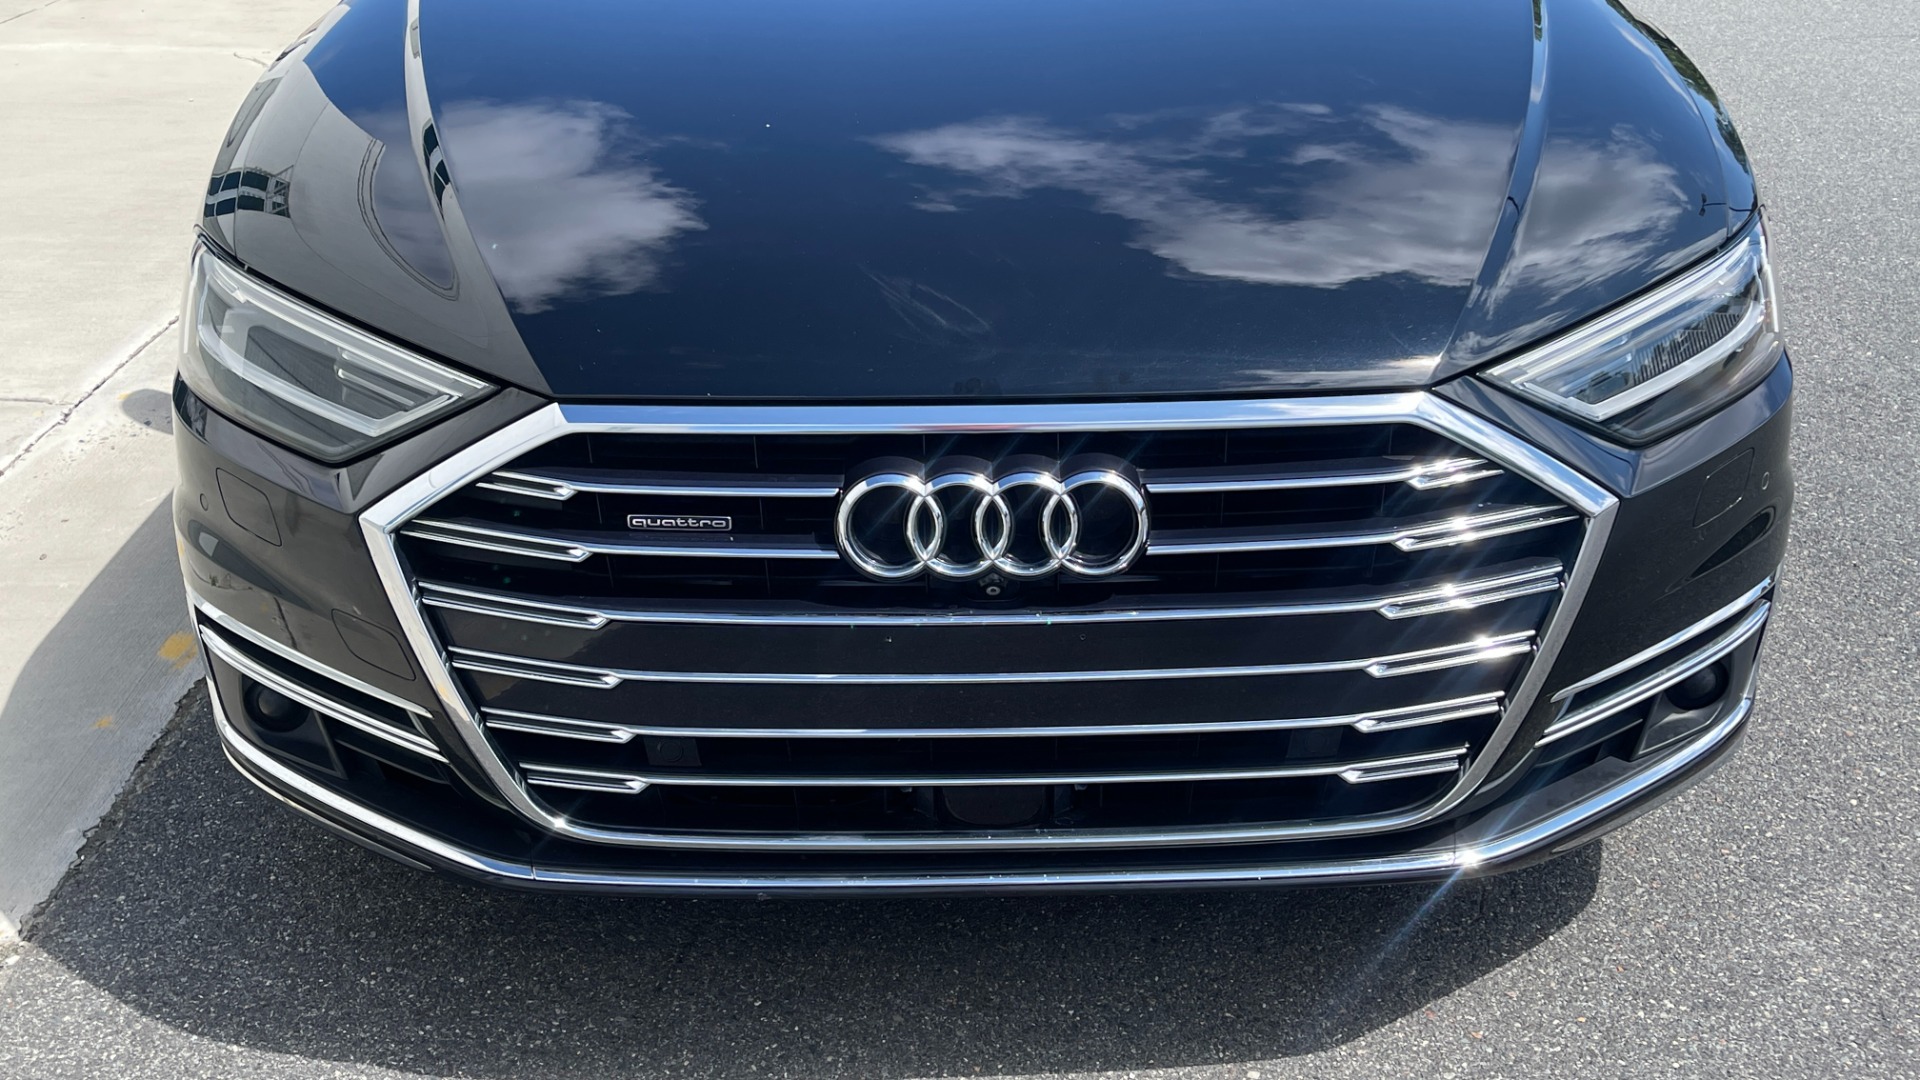 Used 2019 Audi A8L 20IN WHEELS / DRIVER ASSIST / COLD WEATHER / EXECUTIVE PACKAGE for sale $53,995 at Formula Imports in Charlotte NC 28227 7